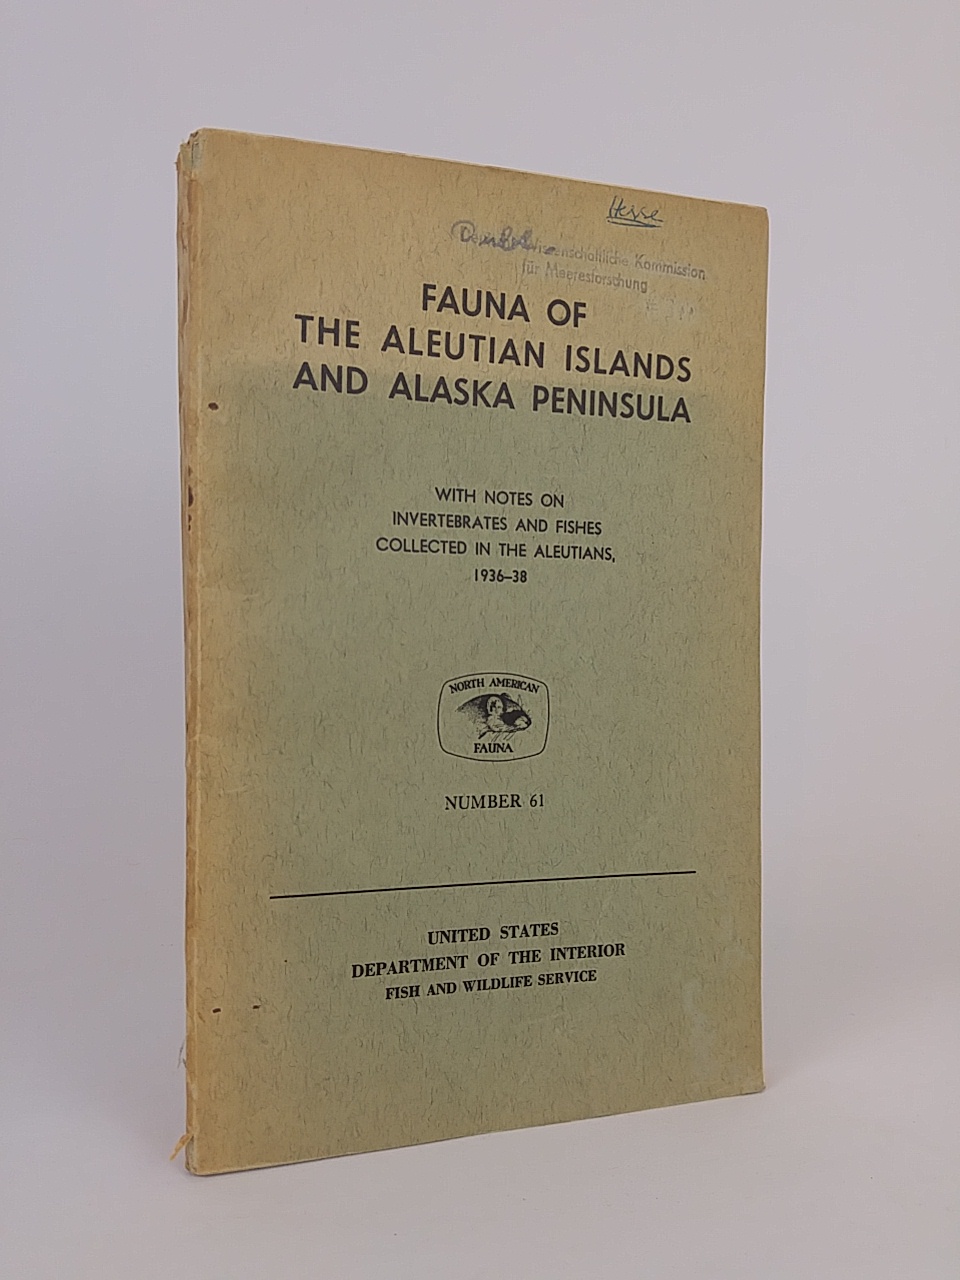 Fauna of the Aleutian Islands and Alaska Peninsula. Invertebrates and Fishes Collected in the Aleutians, 1936-38 - Murie, Olaus J